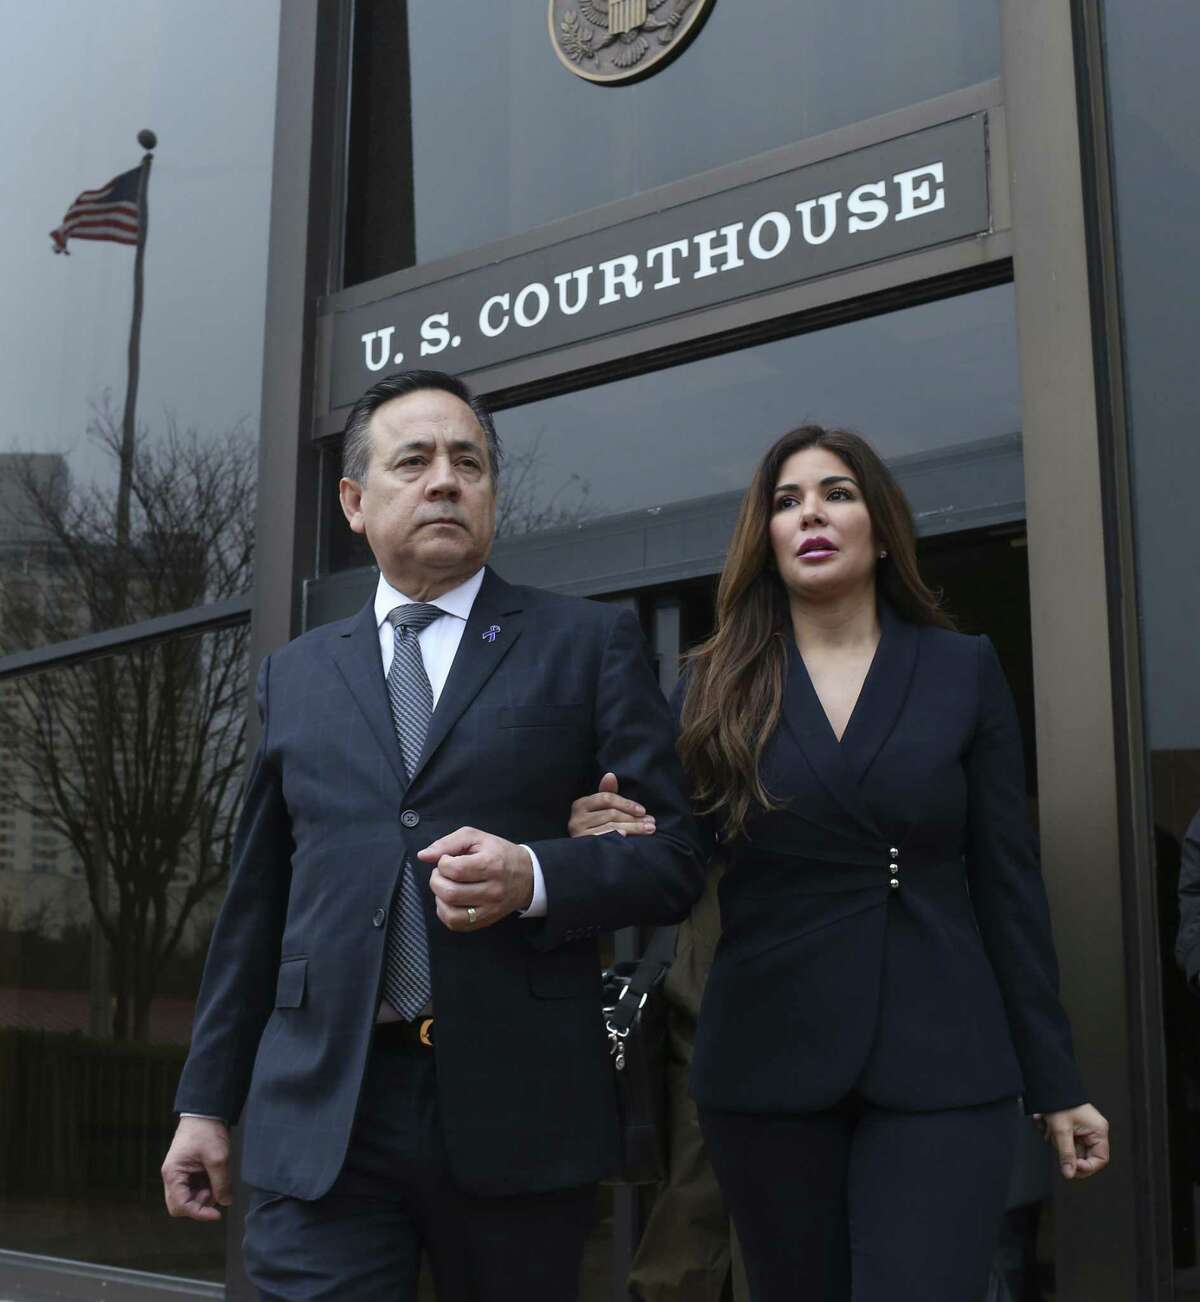 The Heltoes estate owned by former state Sen. Carlos Uresti and his now-estranged wife, Lleanna, is headed for next month’s foreclosure auction. The Urestis are pictured leaving the San Antonio federal courthouse in February following his conviction on 11 felony charges. He was sentenced to 12 years in prison and ordered to pay $6.3 million in restitution to his victims. Lleanna Uresti filed for divorce shortly after the conviction.